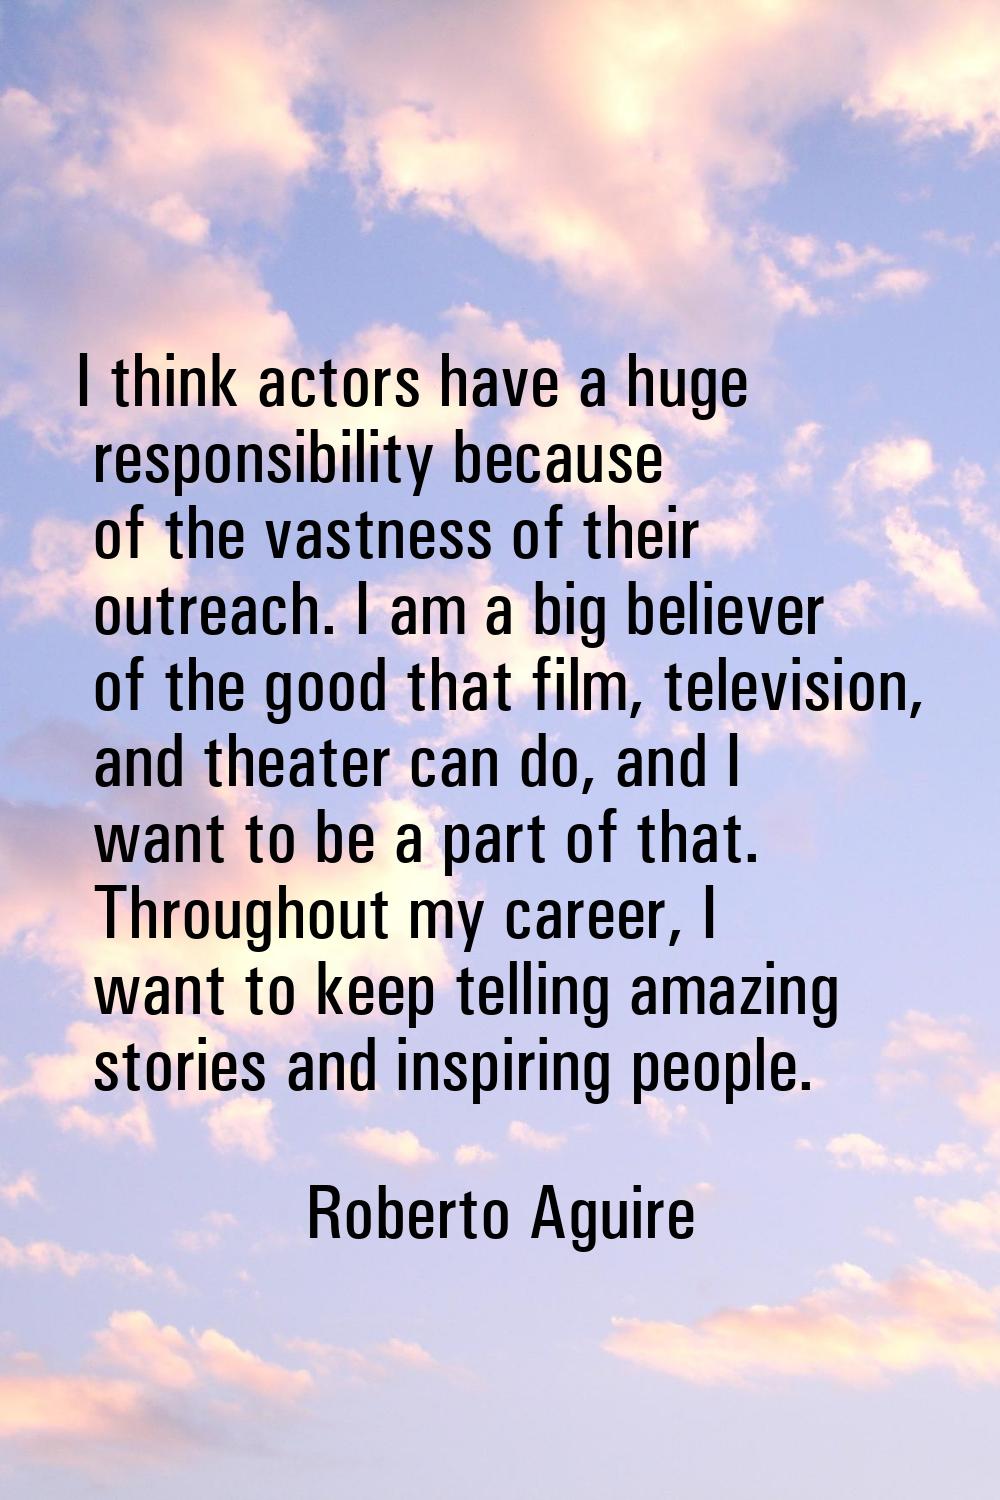 I think actors have a huge responsibility because of the vastness of their outreach. I am a big bel